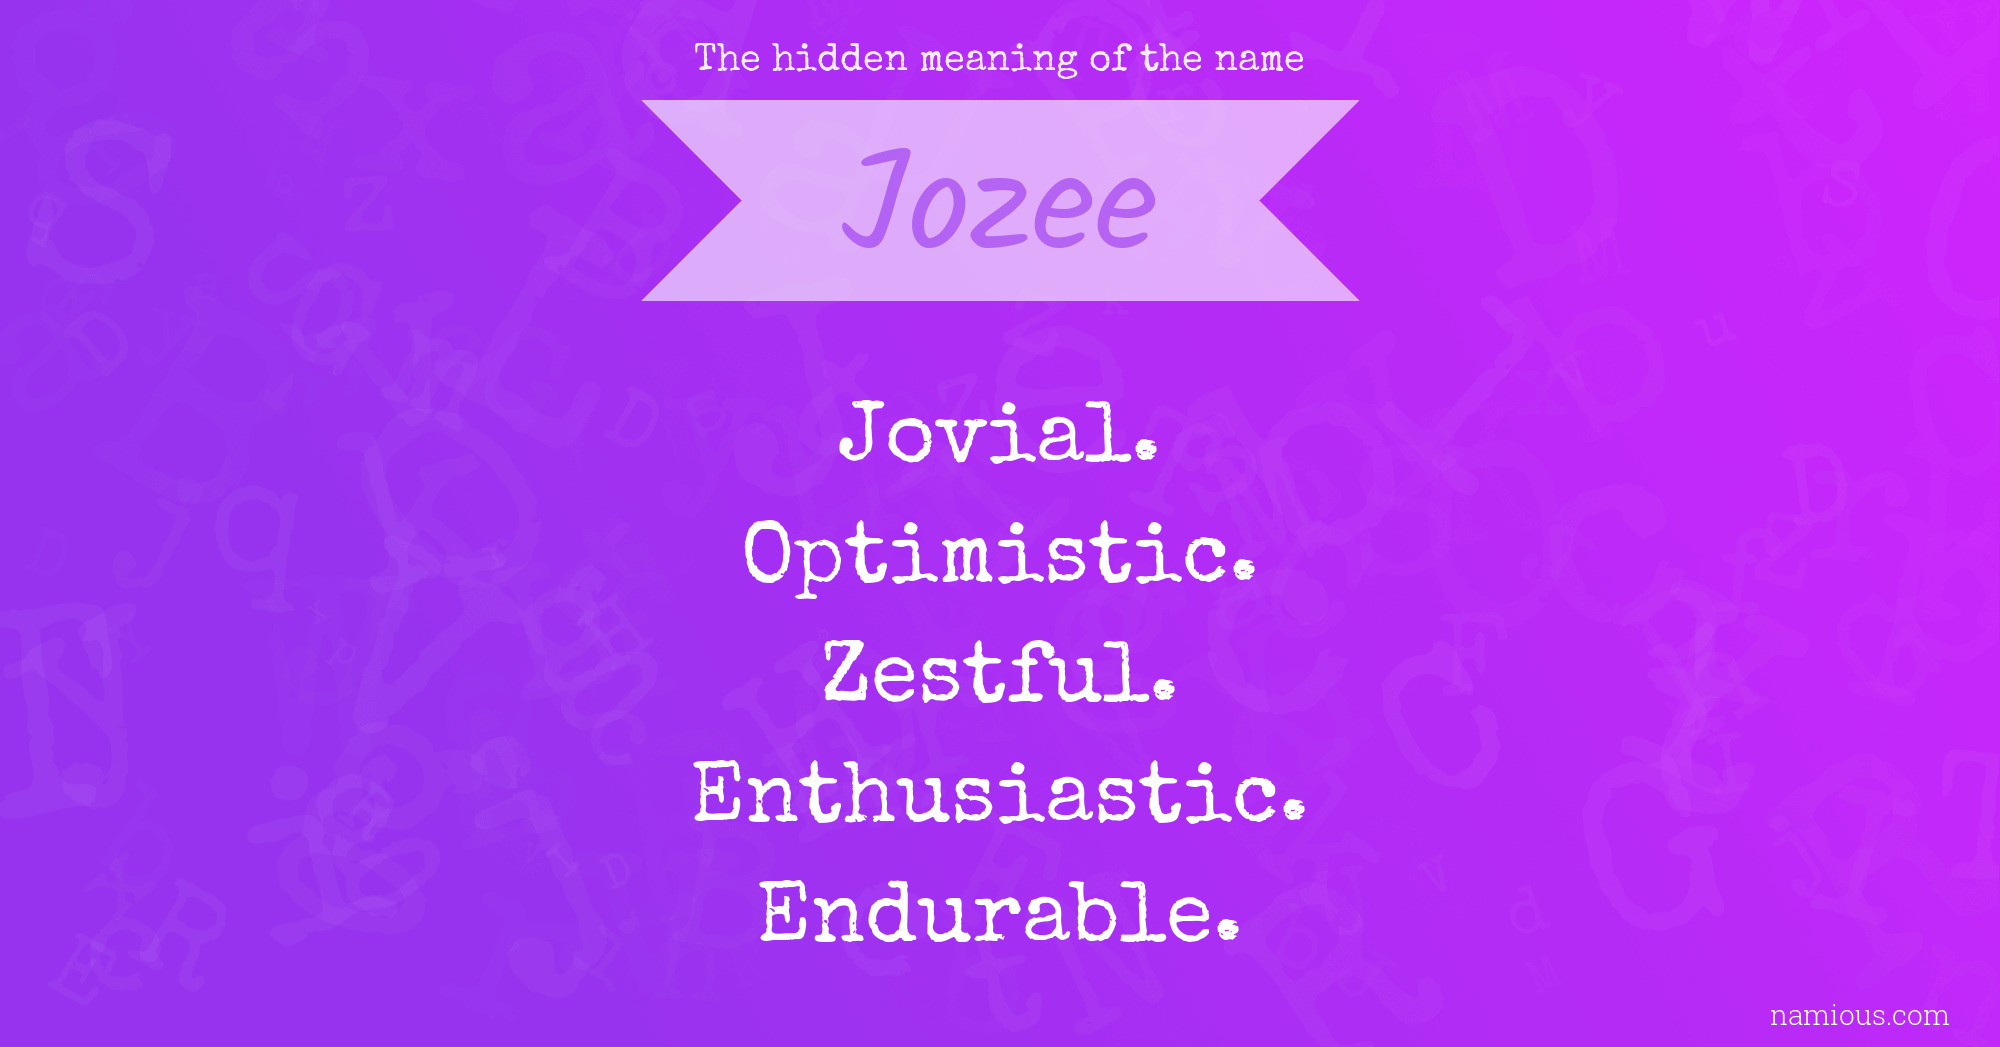 The hidden meaning of the name Jozee